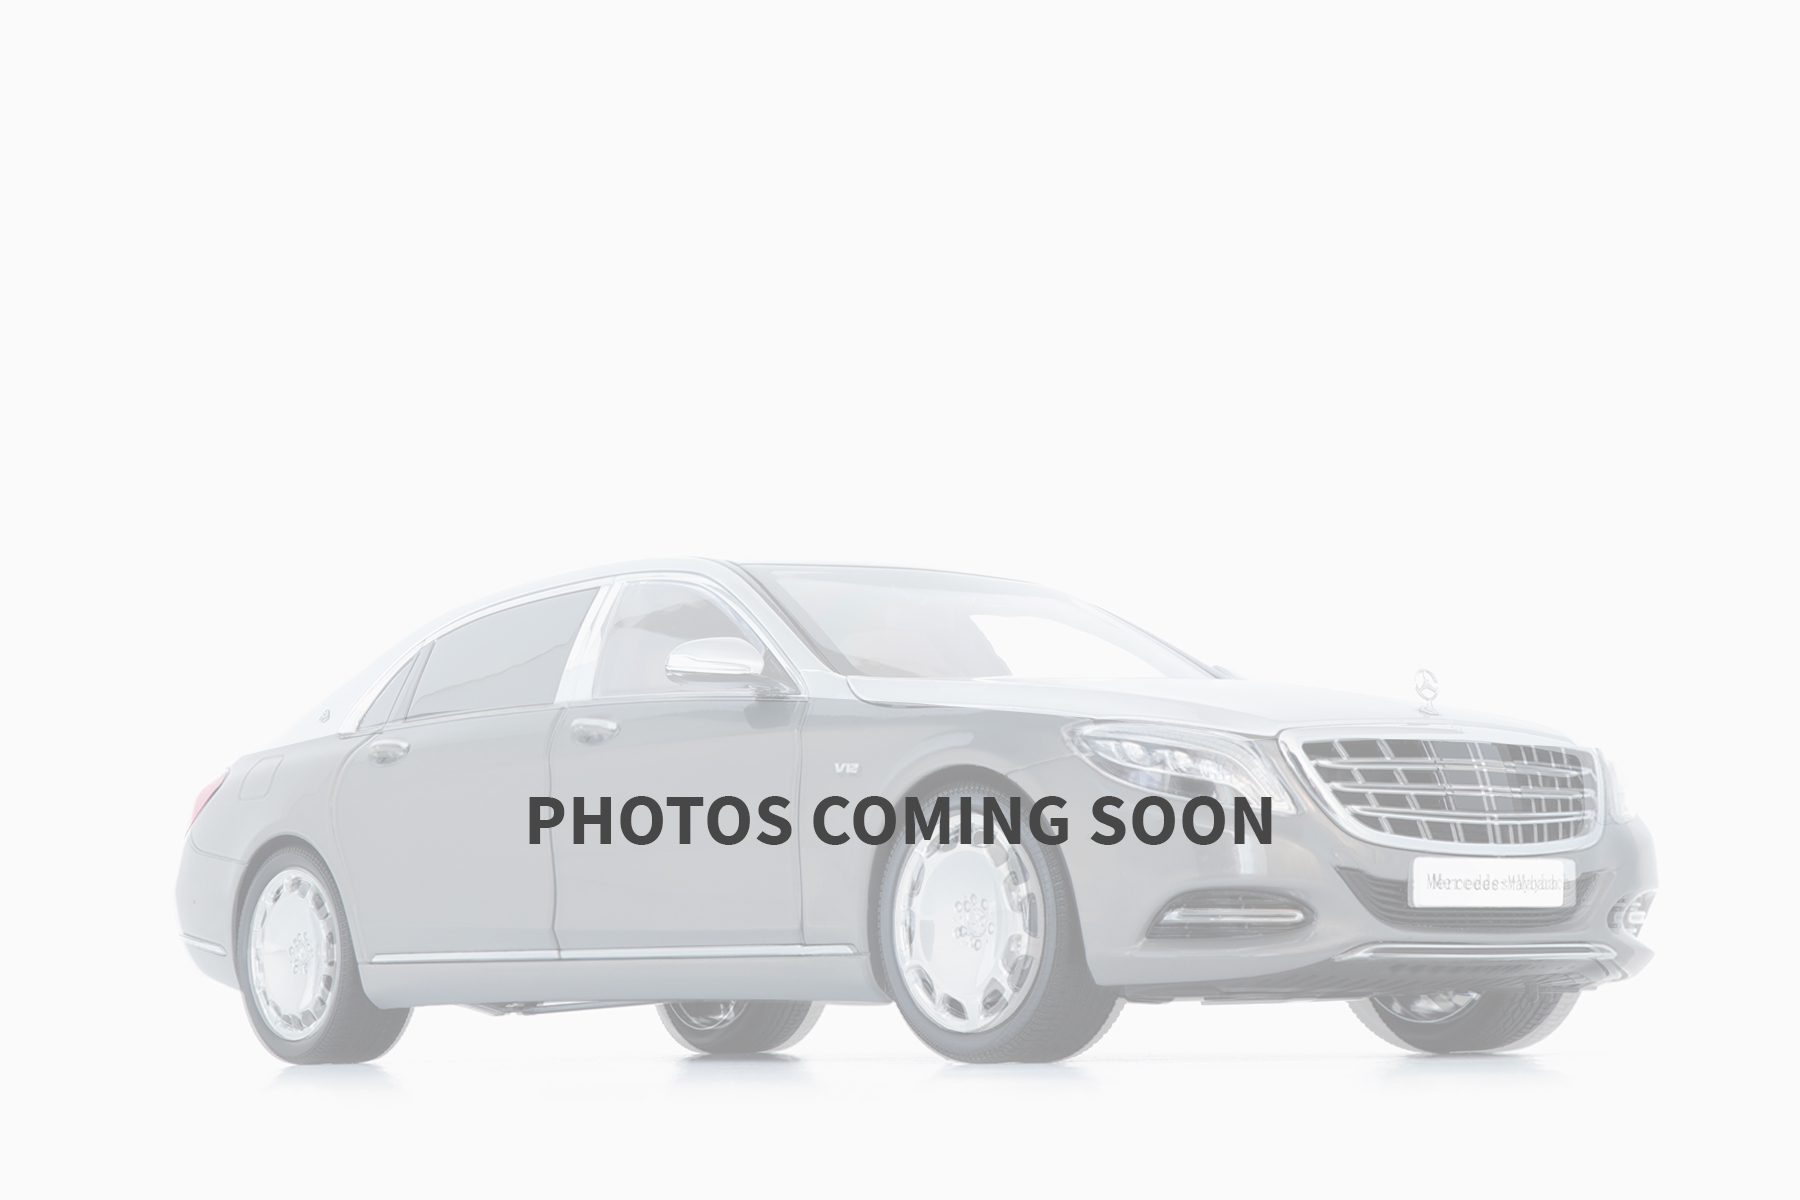 Mercedes-Maybach S-Class - 2019 - Obsidian Black/Iridium Silver 1:18 almost real